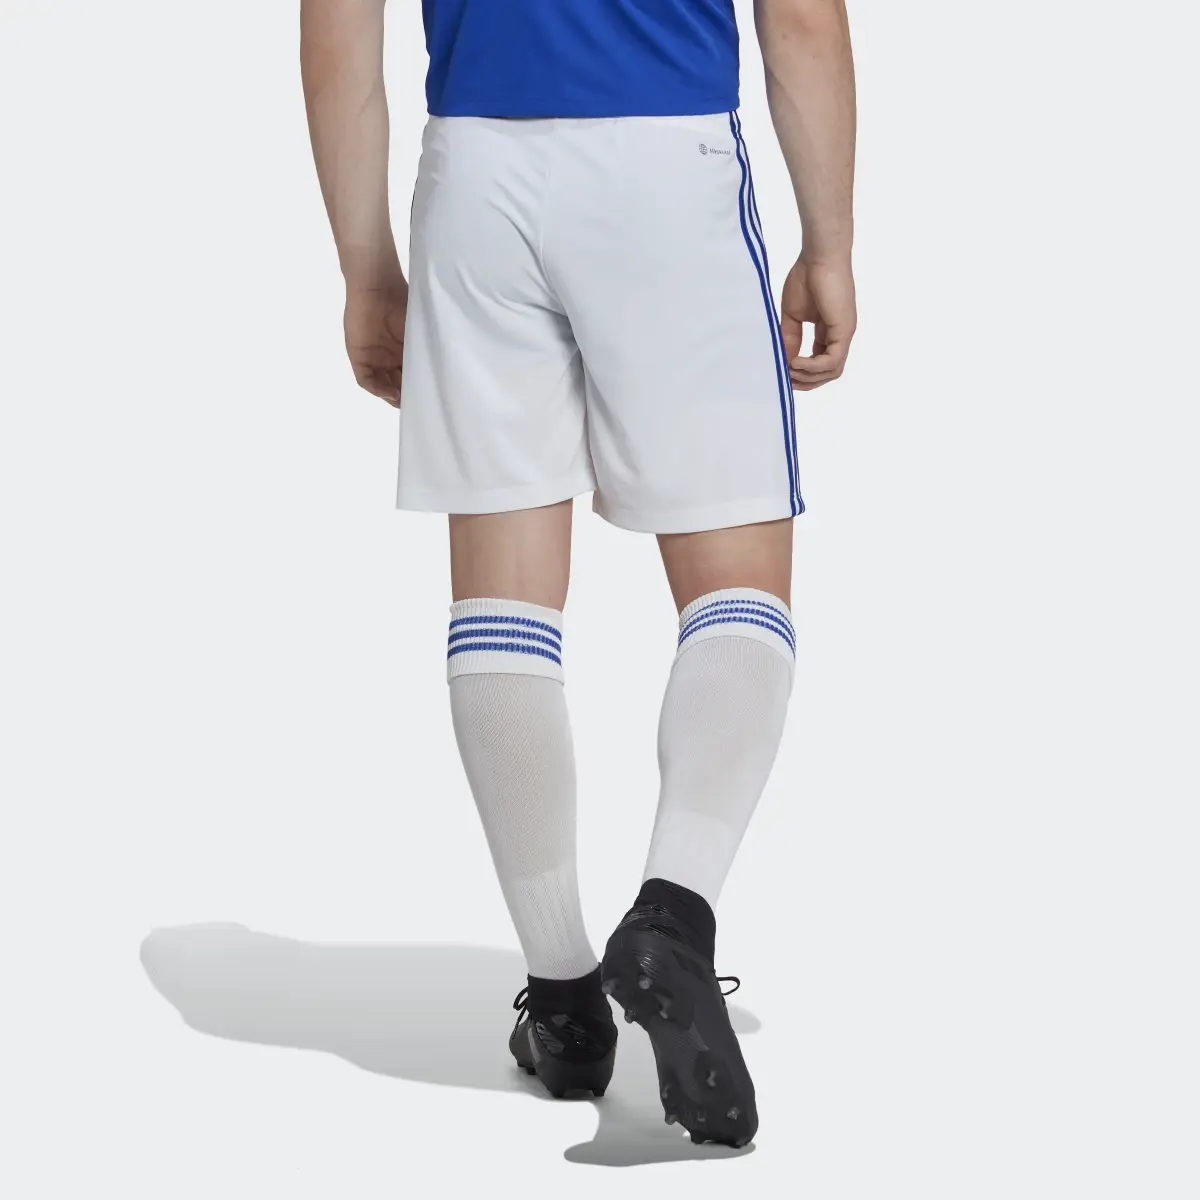 Adidas Short Home 22/23 Leicester City FC. 2